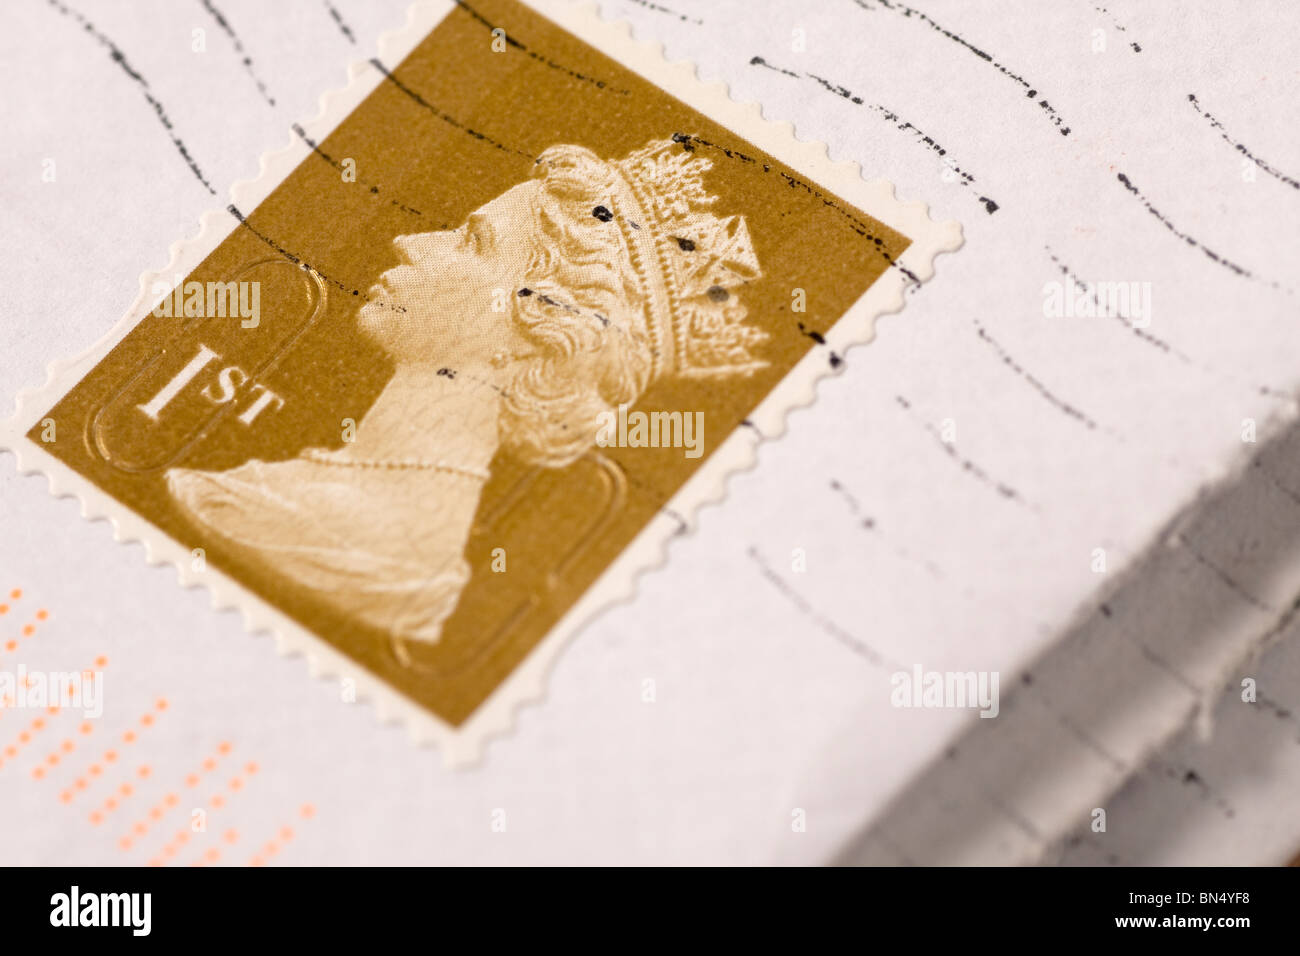 Close up of an envelope with 1st class UK postage stamp Stock Photo